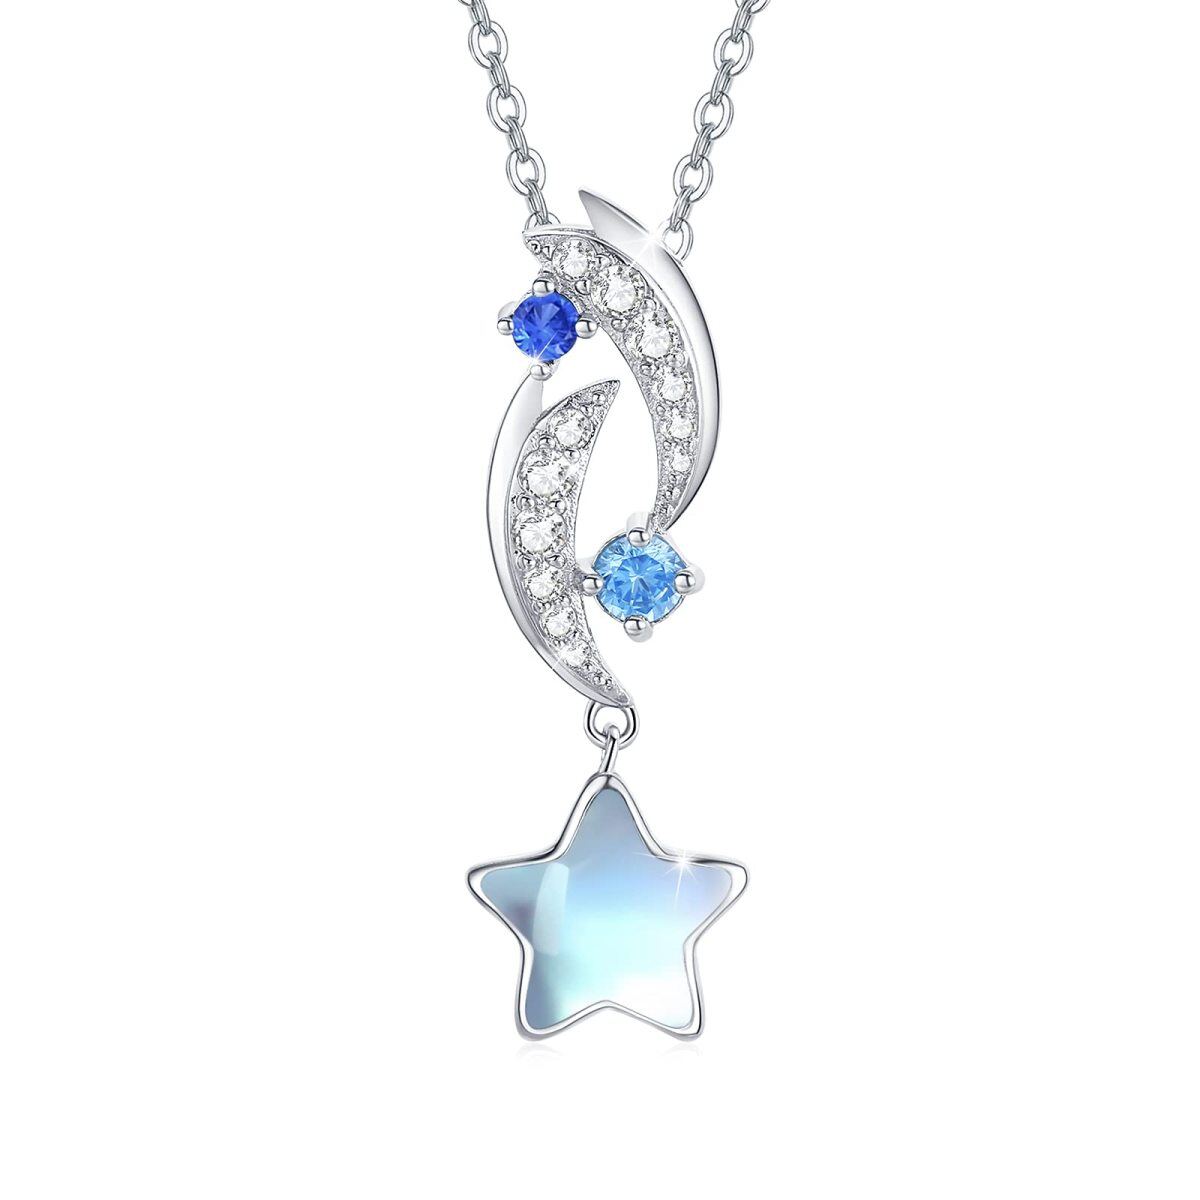 Sterling Silver Moonstone Moon Pendant Necklace-1